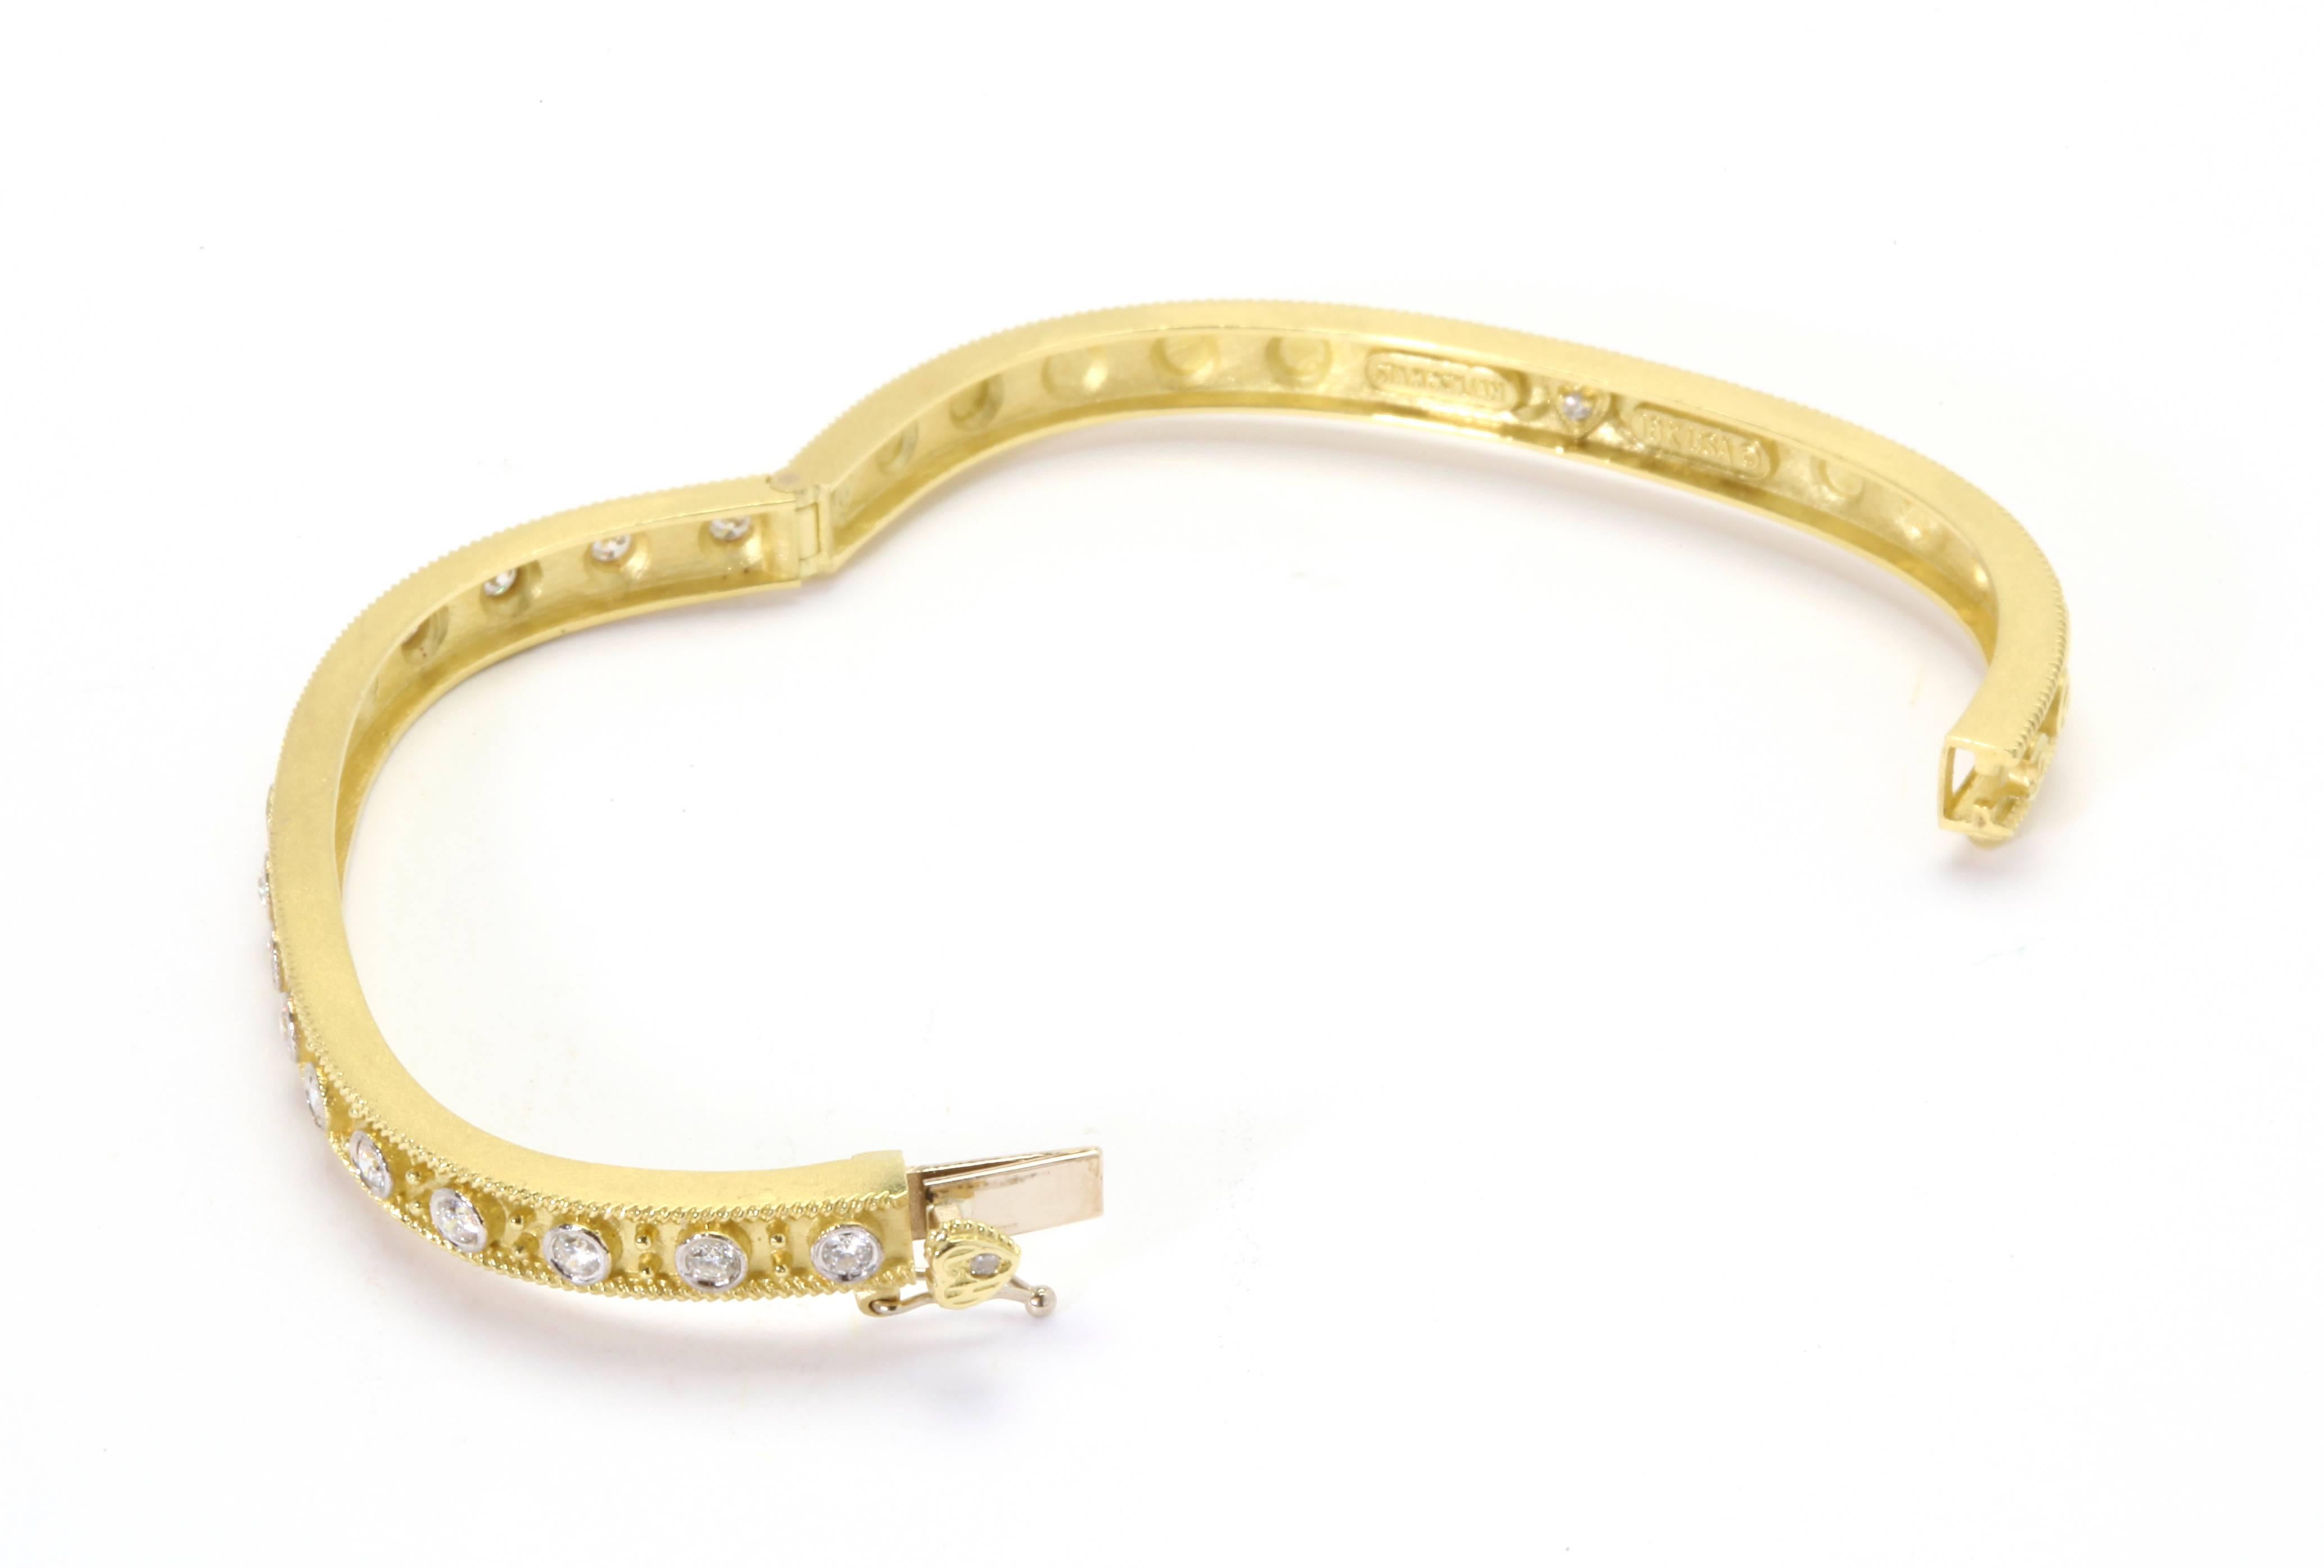 18K Gold Bangle Bracelet with Diamonds

16 Diamonds total, 0.82ct. G Color, VS Clarity diamonds

Size 7 but sizable

Push button clasp used with safety to open and close.

Signed STAMBOLIAN with our Trademark 